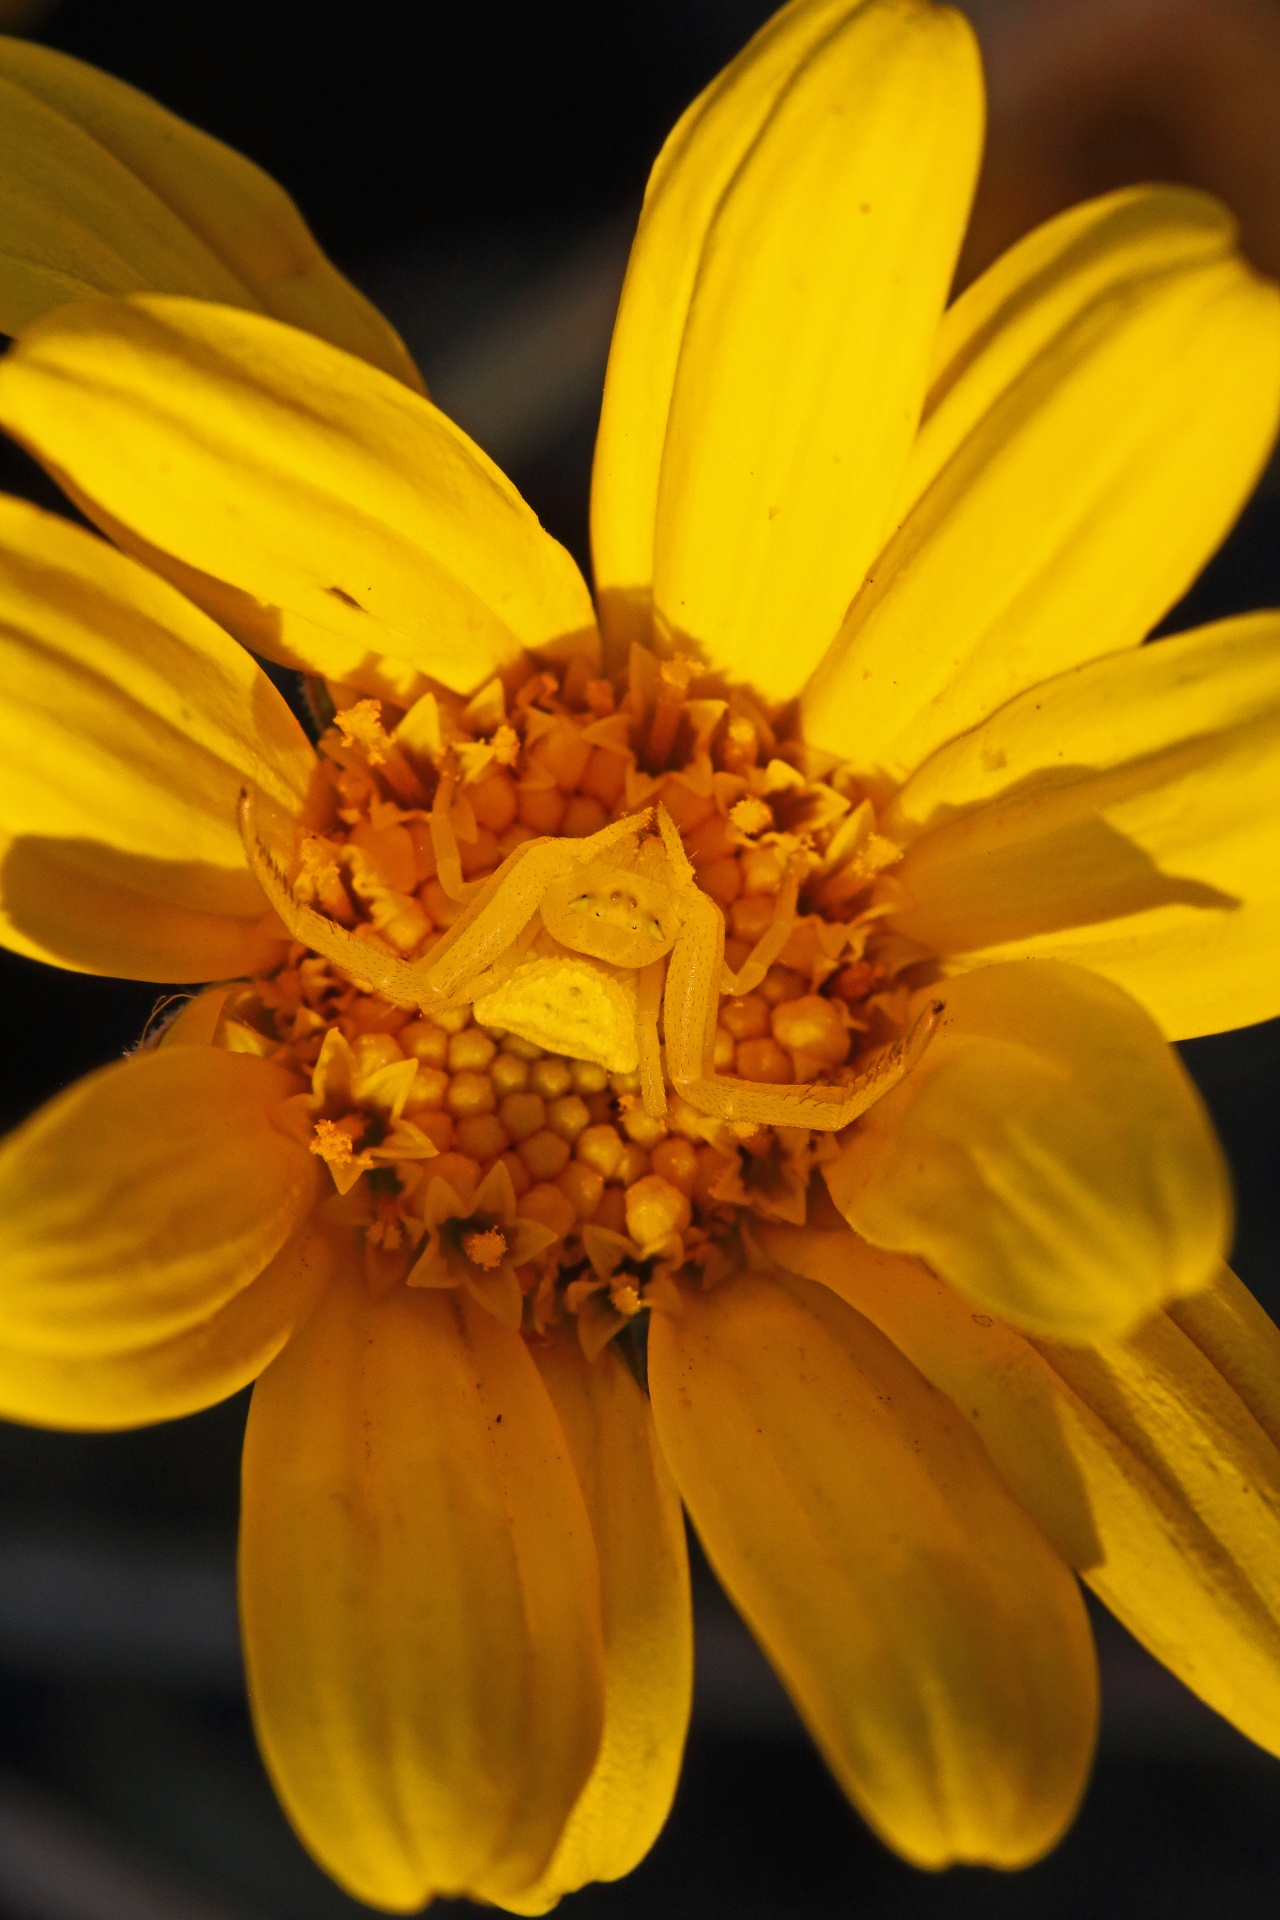 view of yellow crab spider on centre of yellow daisy